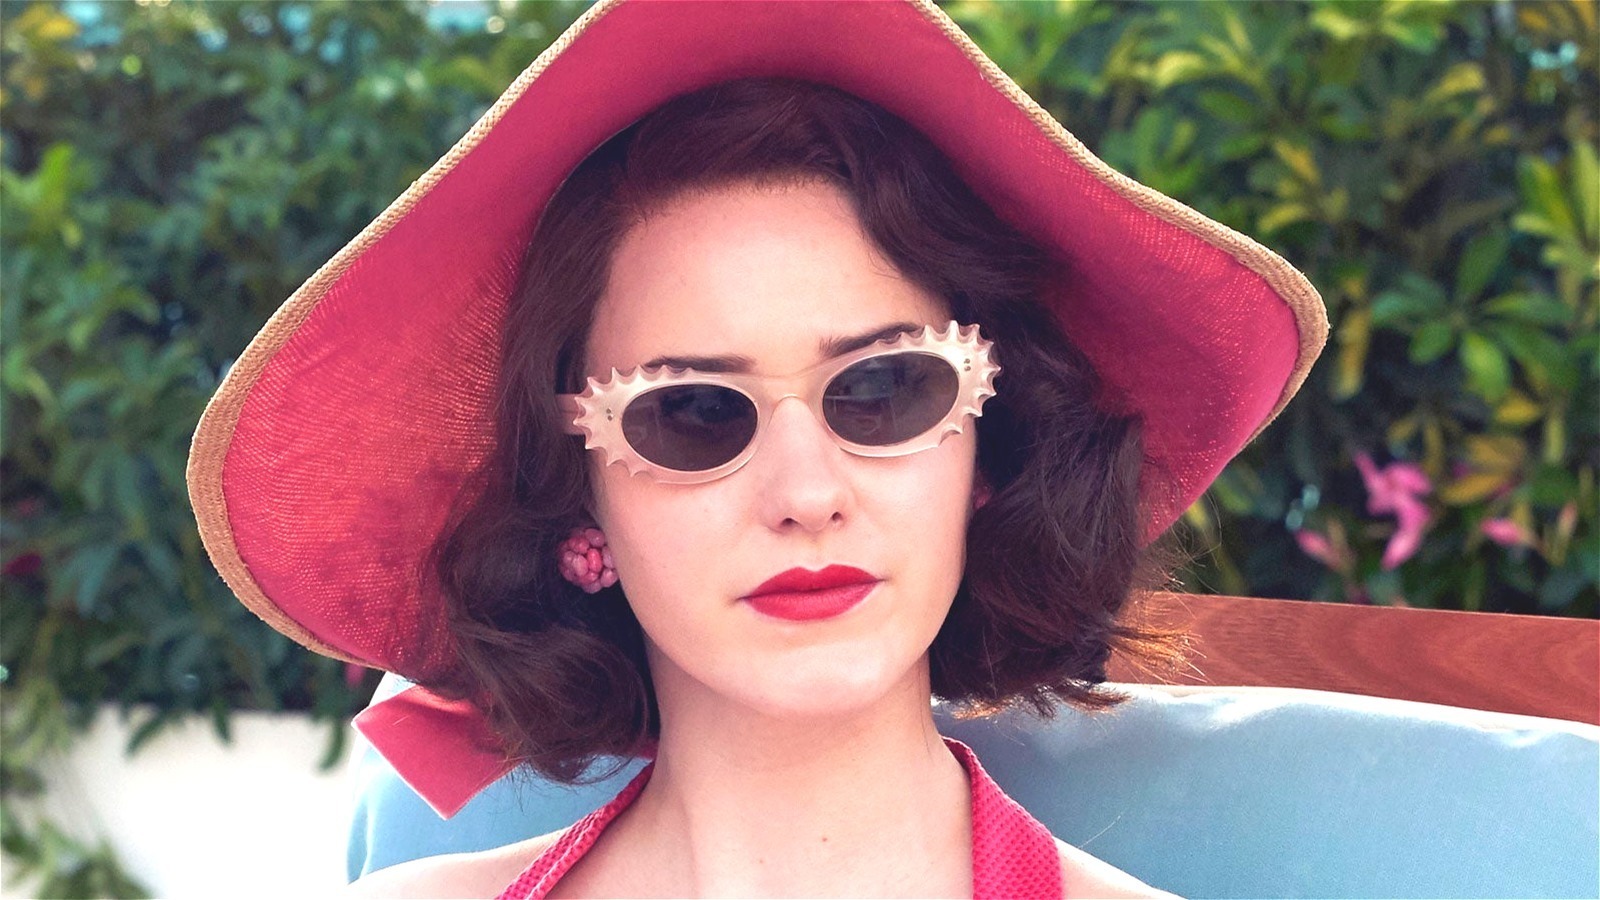 The Marvelous Mrs. Maisel Season 4 Release Date, Cast, And Plot What